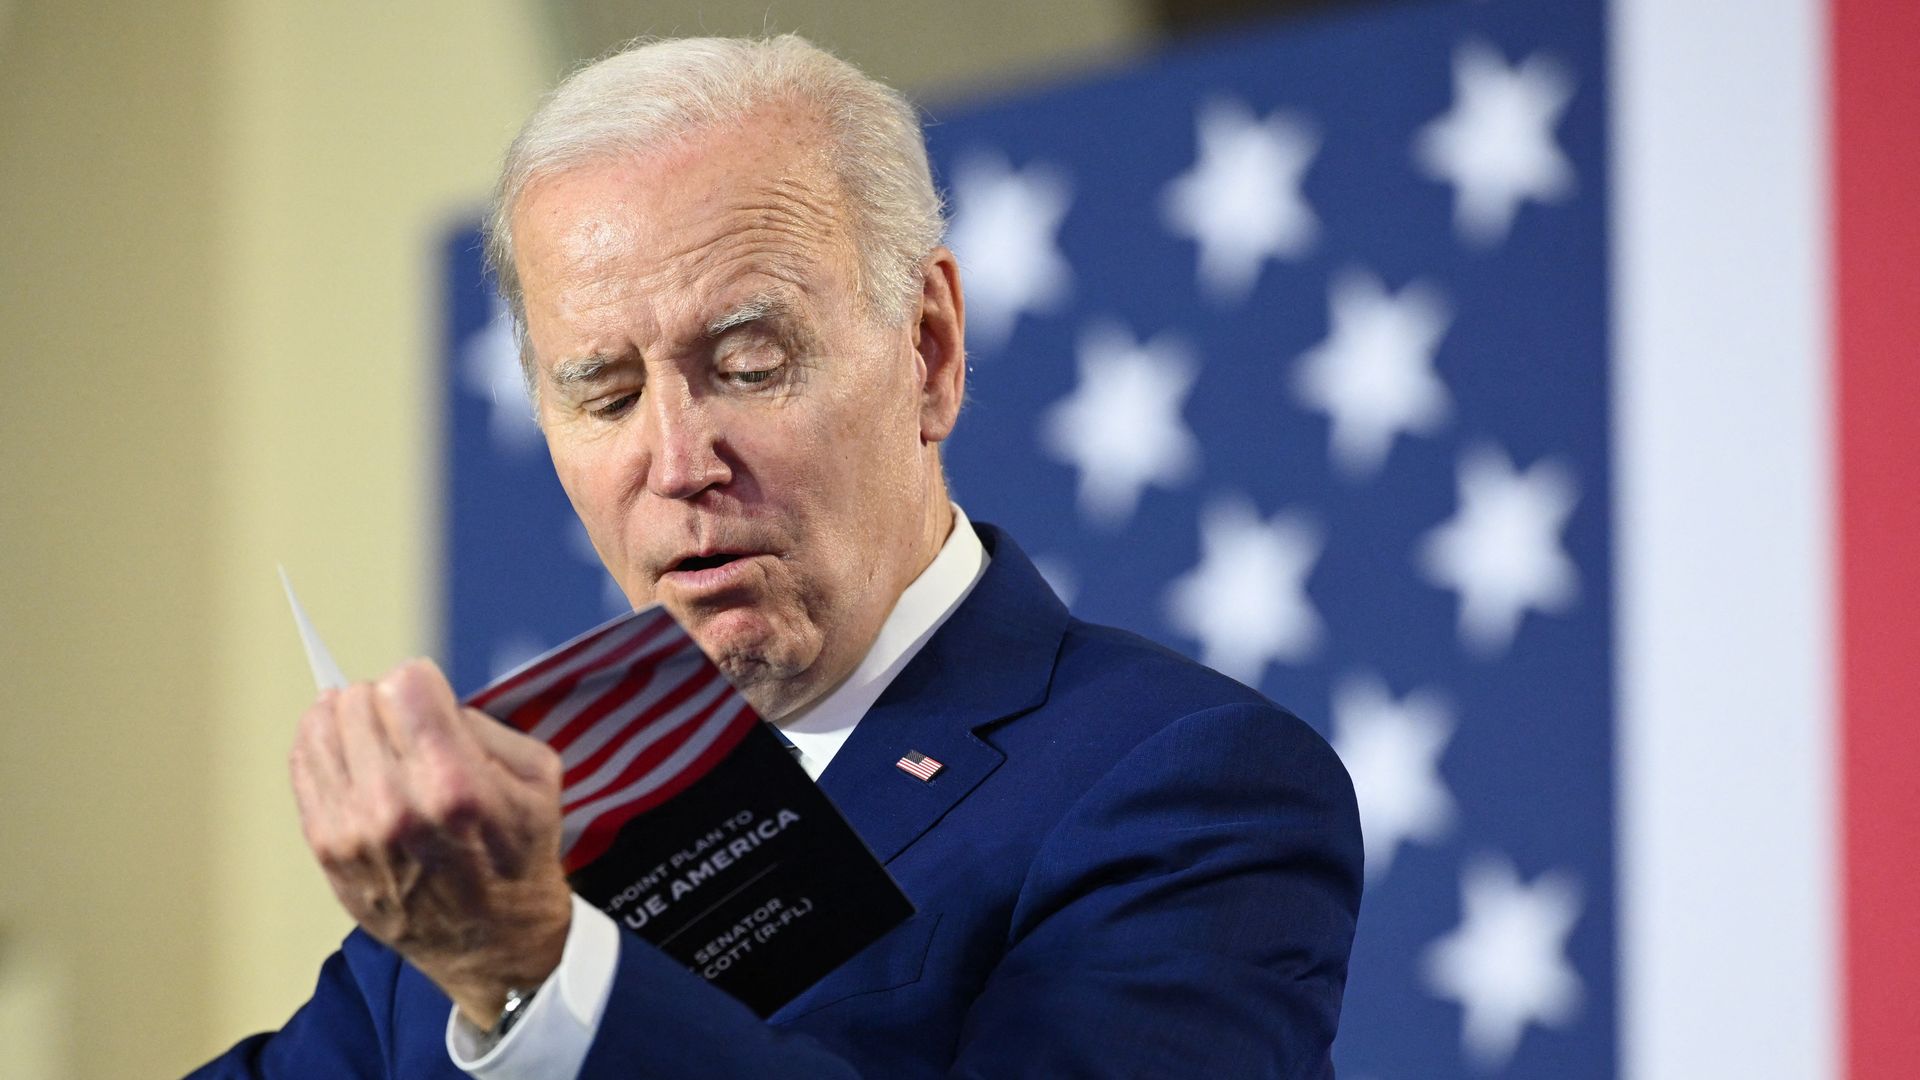 Biden reading from pamphlet